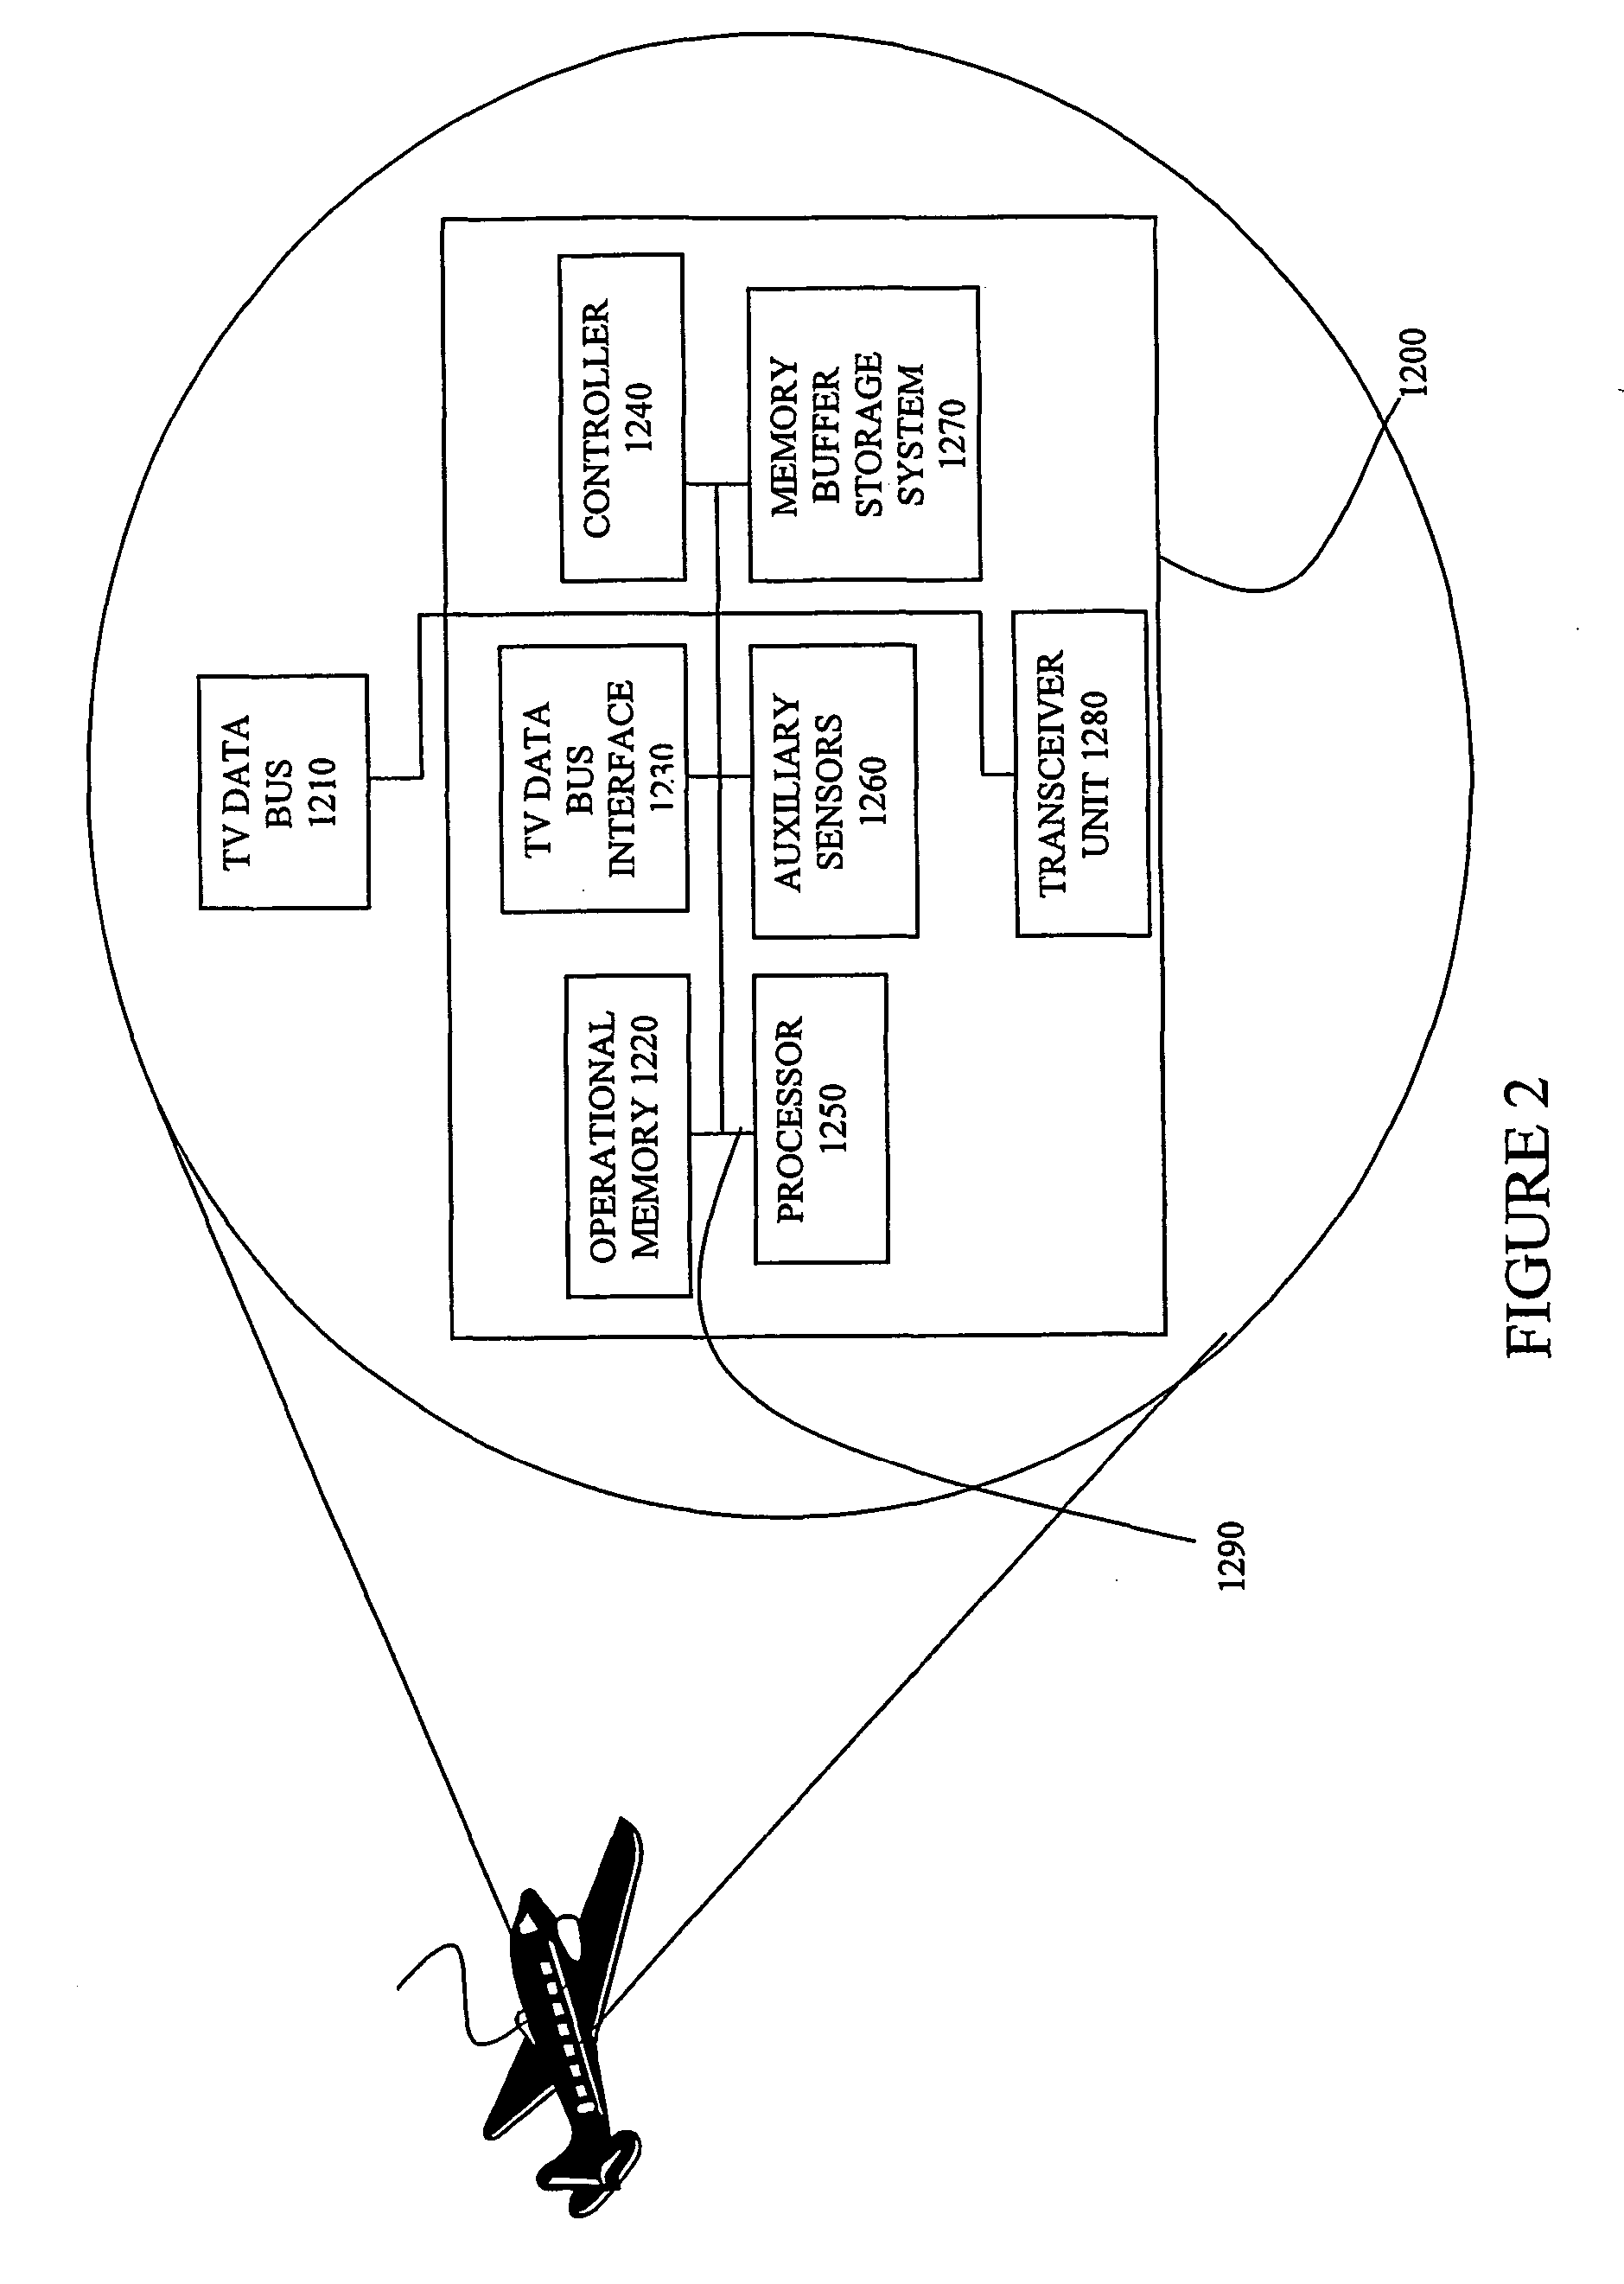 System and method for transportation vehicle monitoring, feedback and control